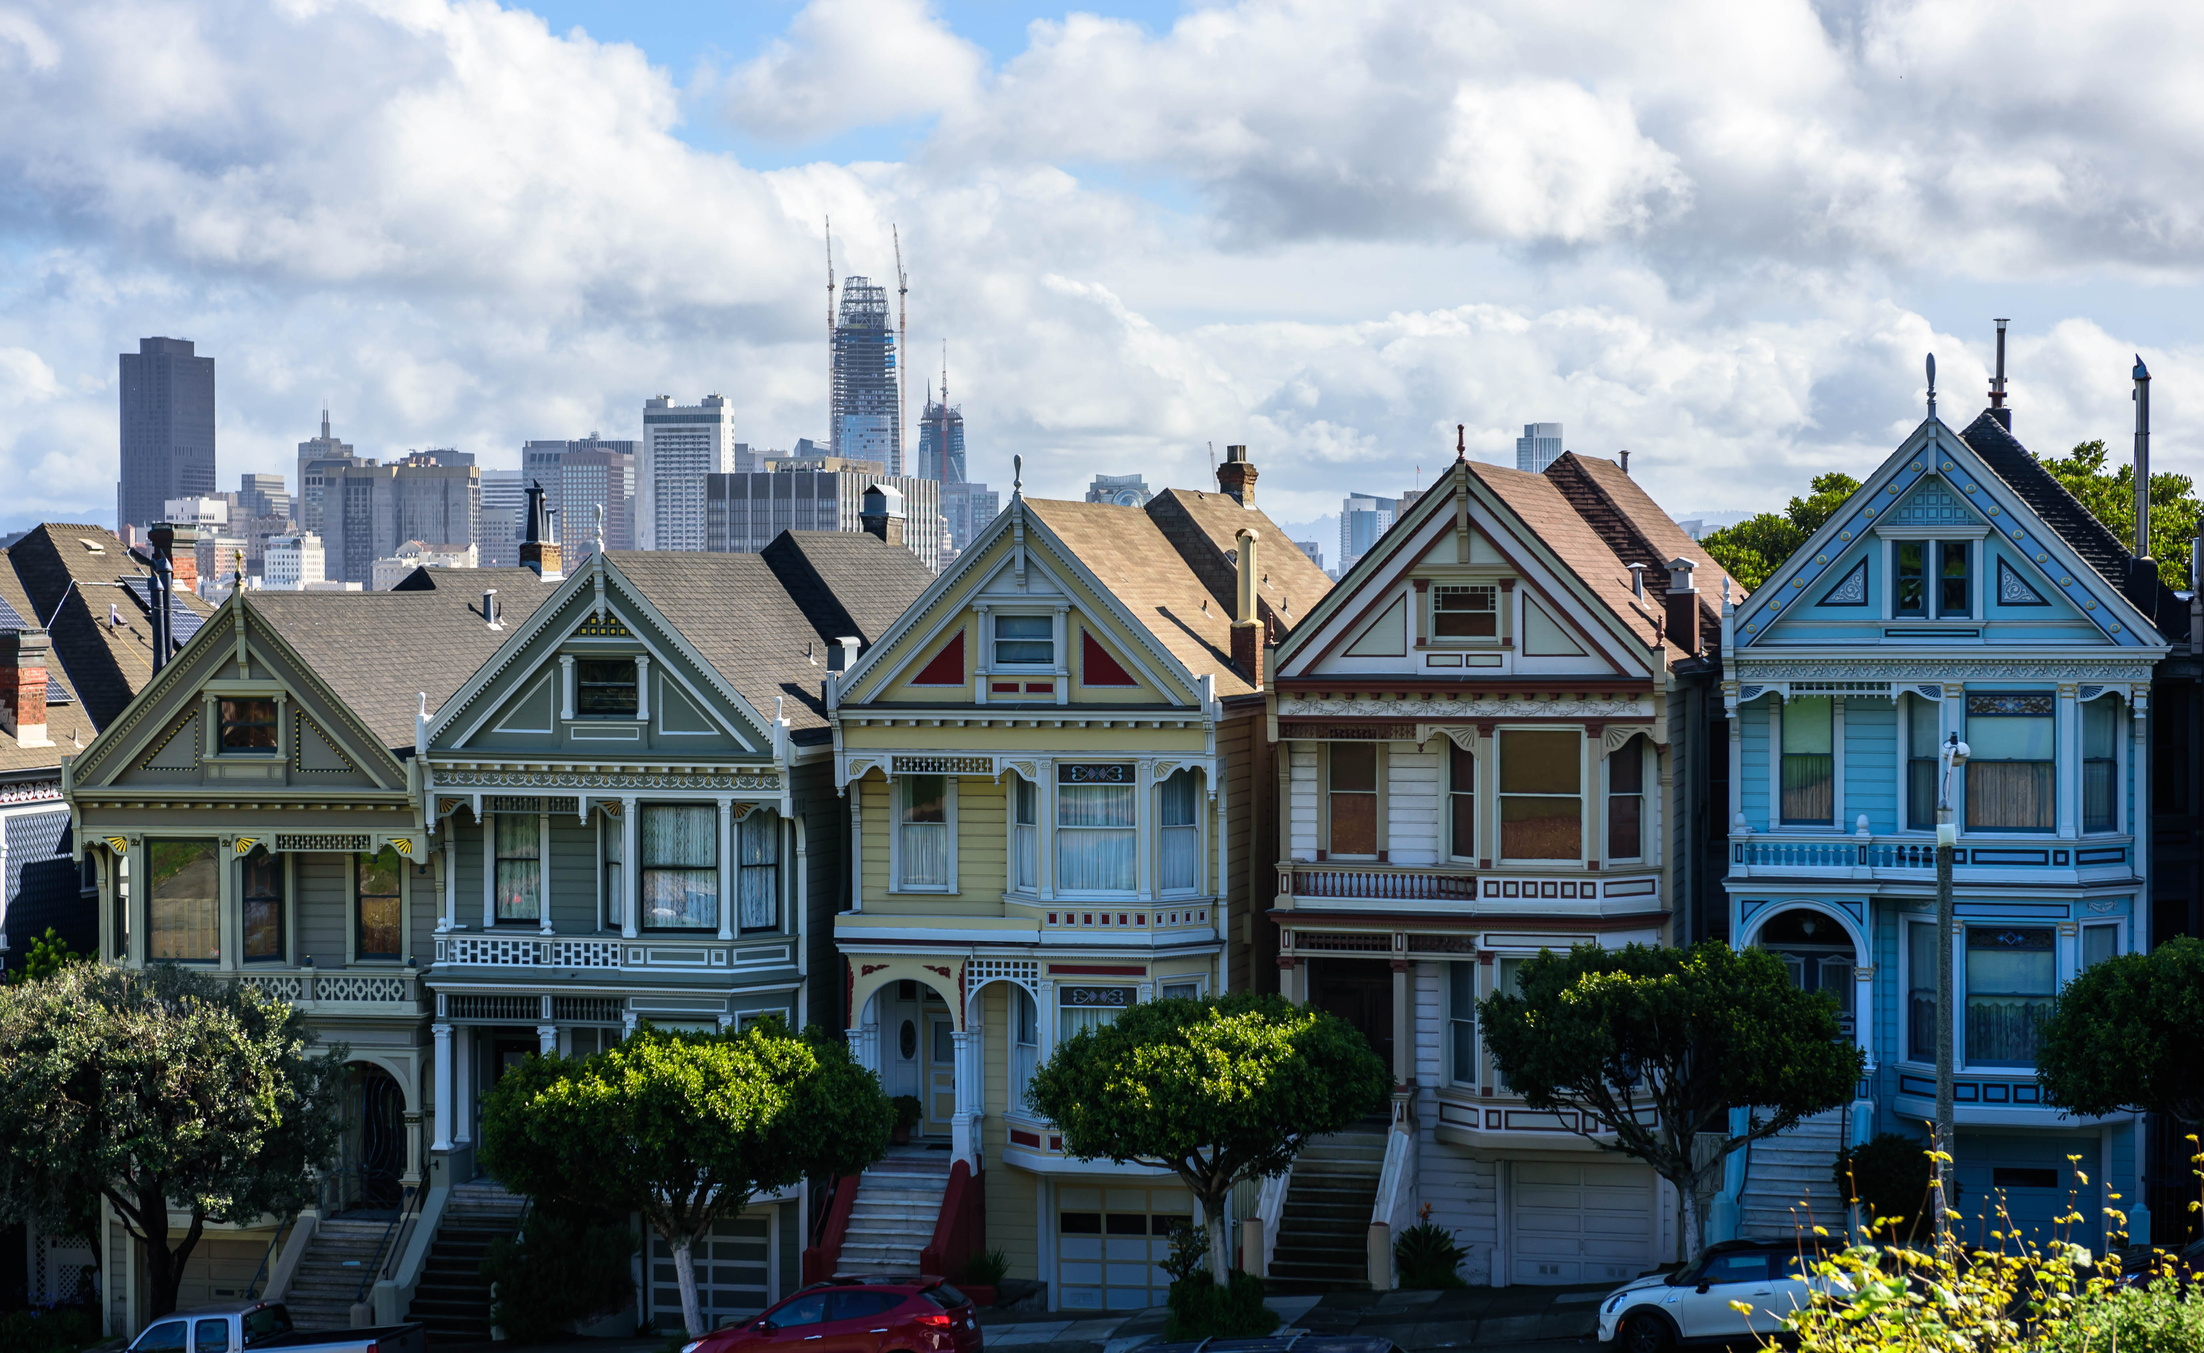 Houses in the Streets of San Francisco